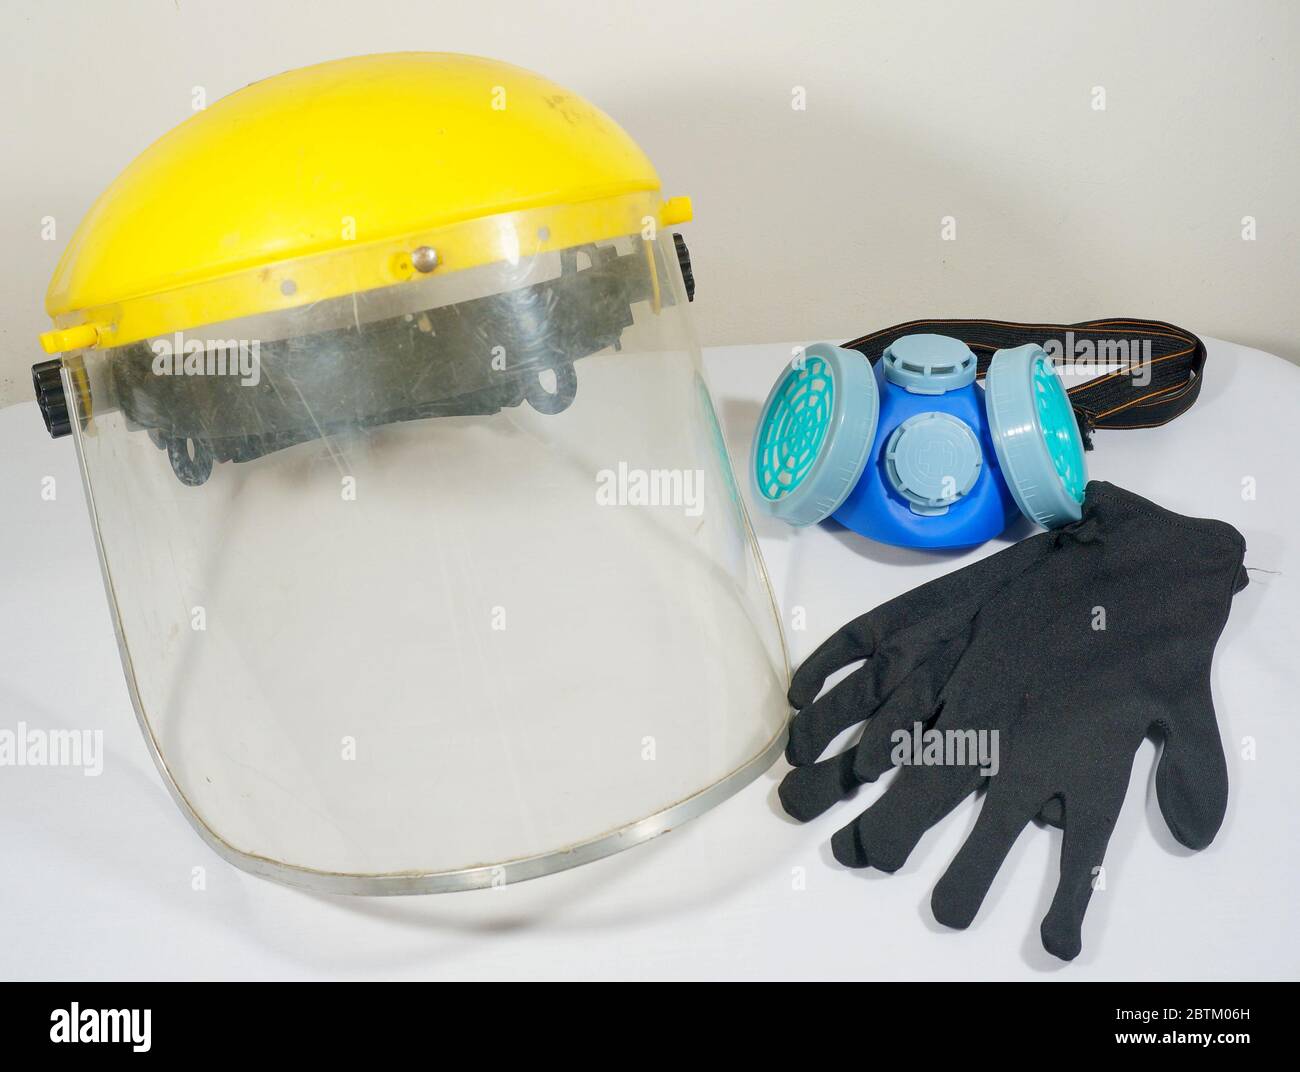 Examples of Personal Protective Equipment. Photo taken in a shop in Benguet, Philippines on May 27, 2020. Stock Photo